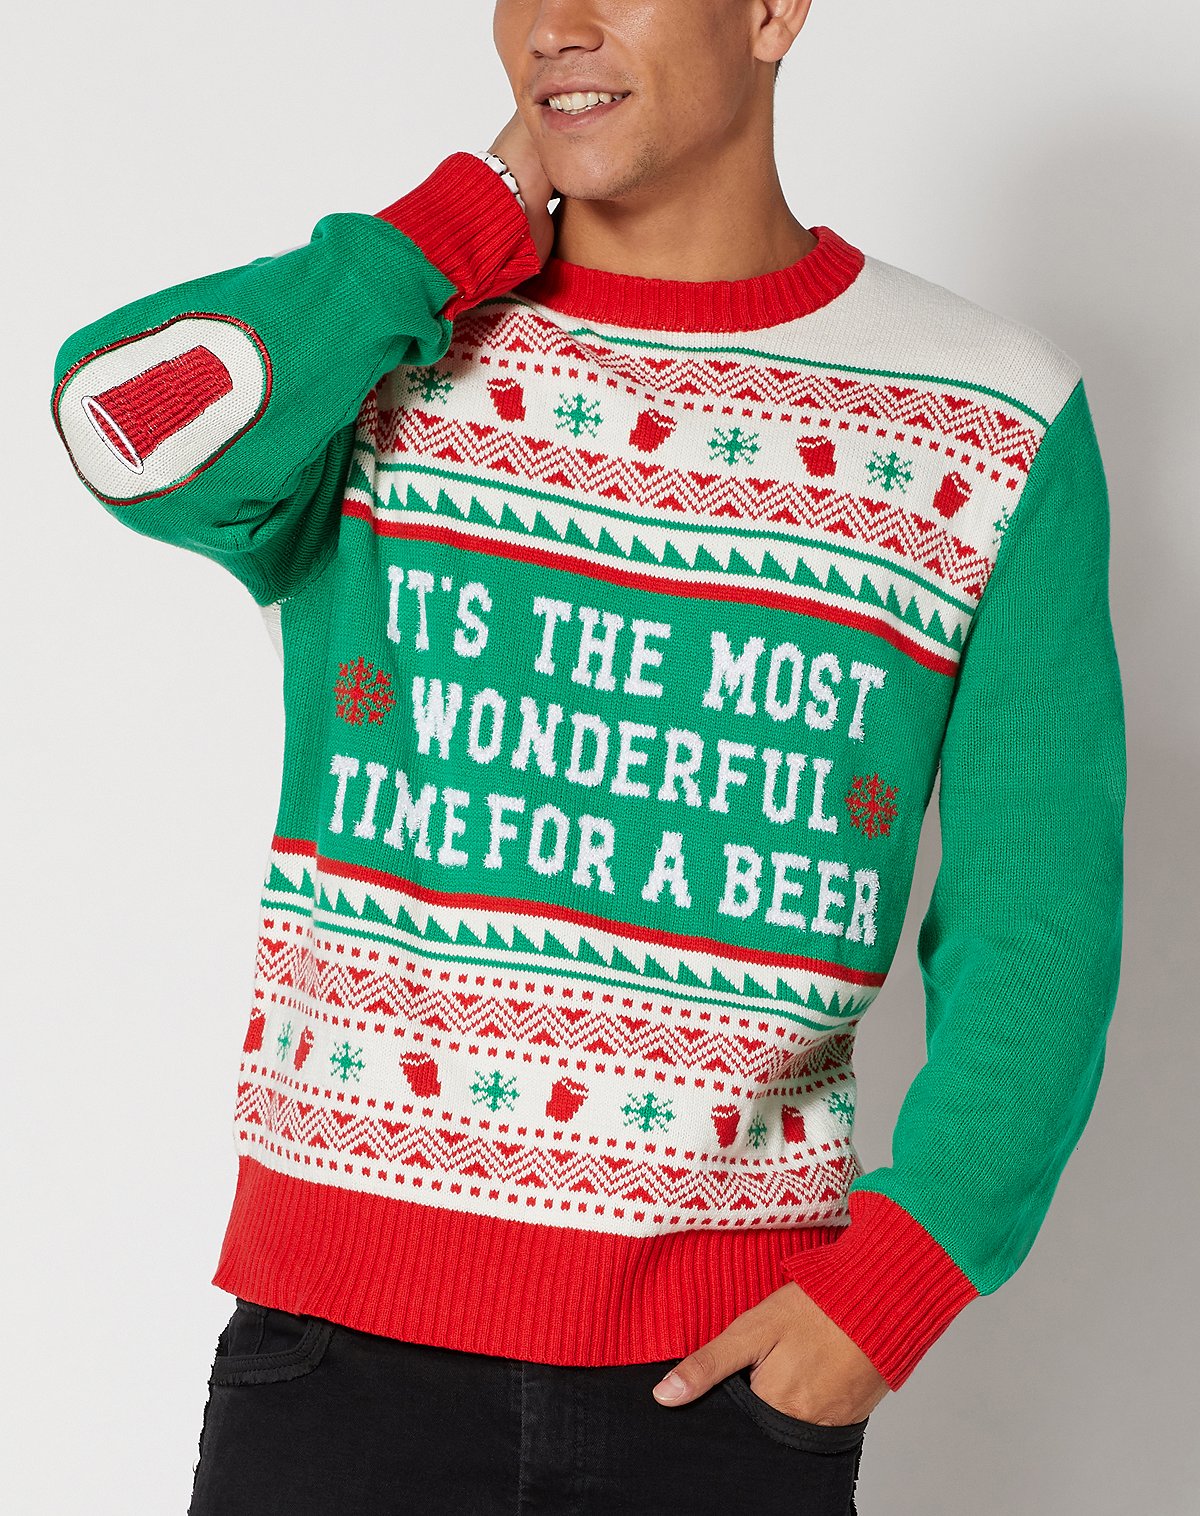 Spencer's It’s The Most Wonderful Time For A Beer Ugly Christmas Sweater